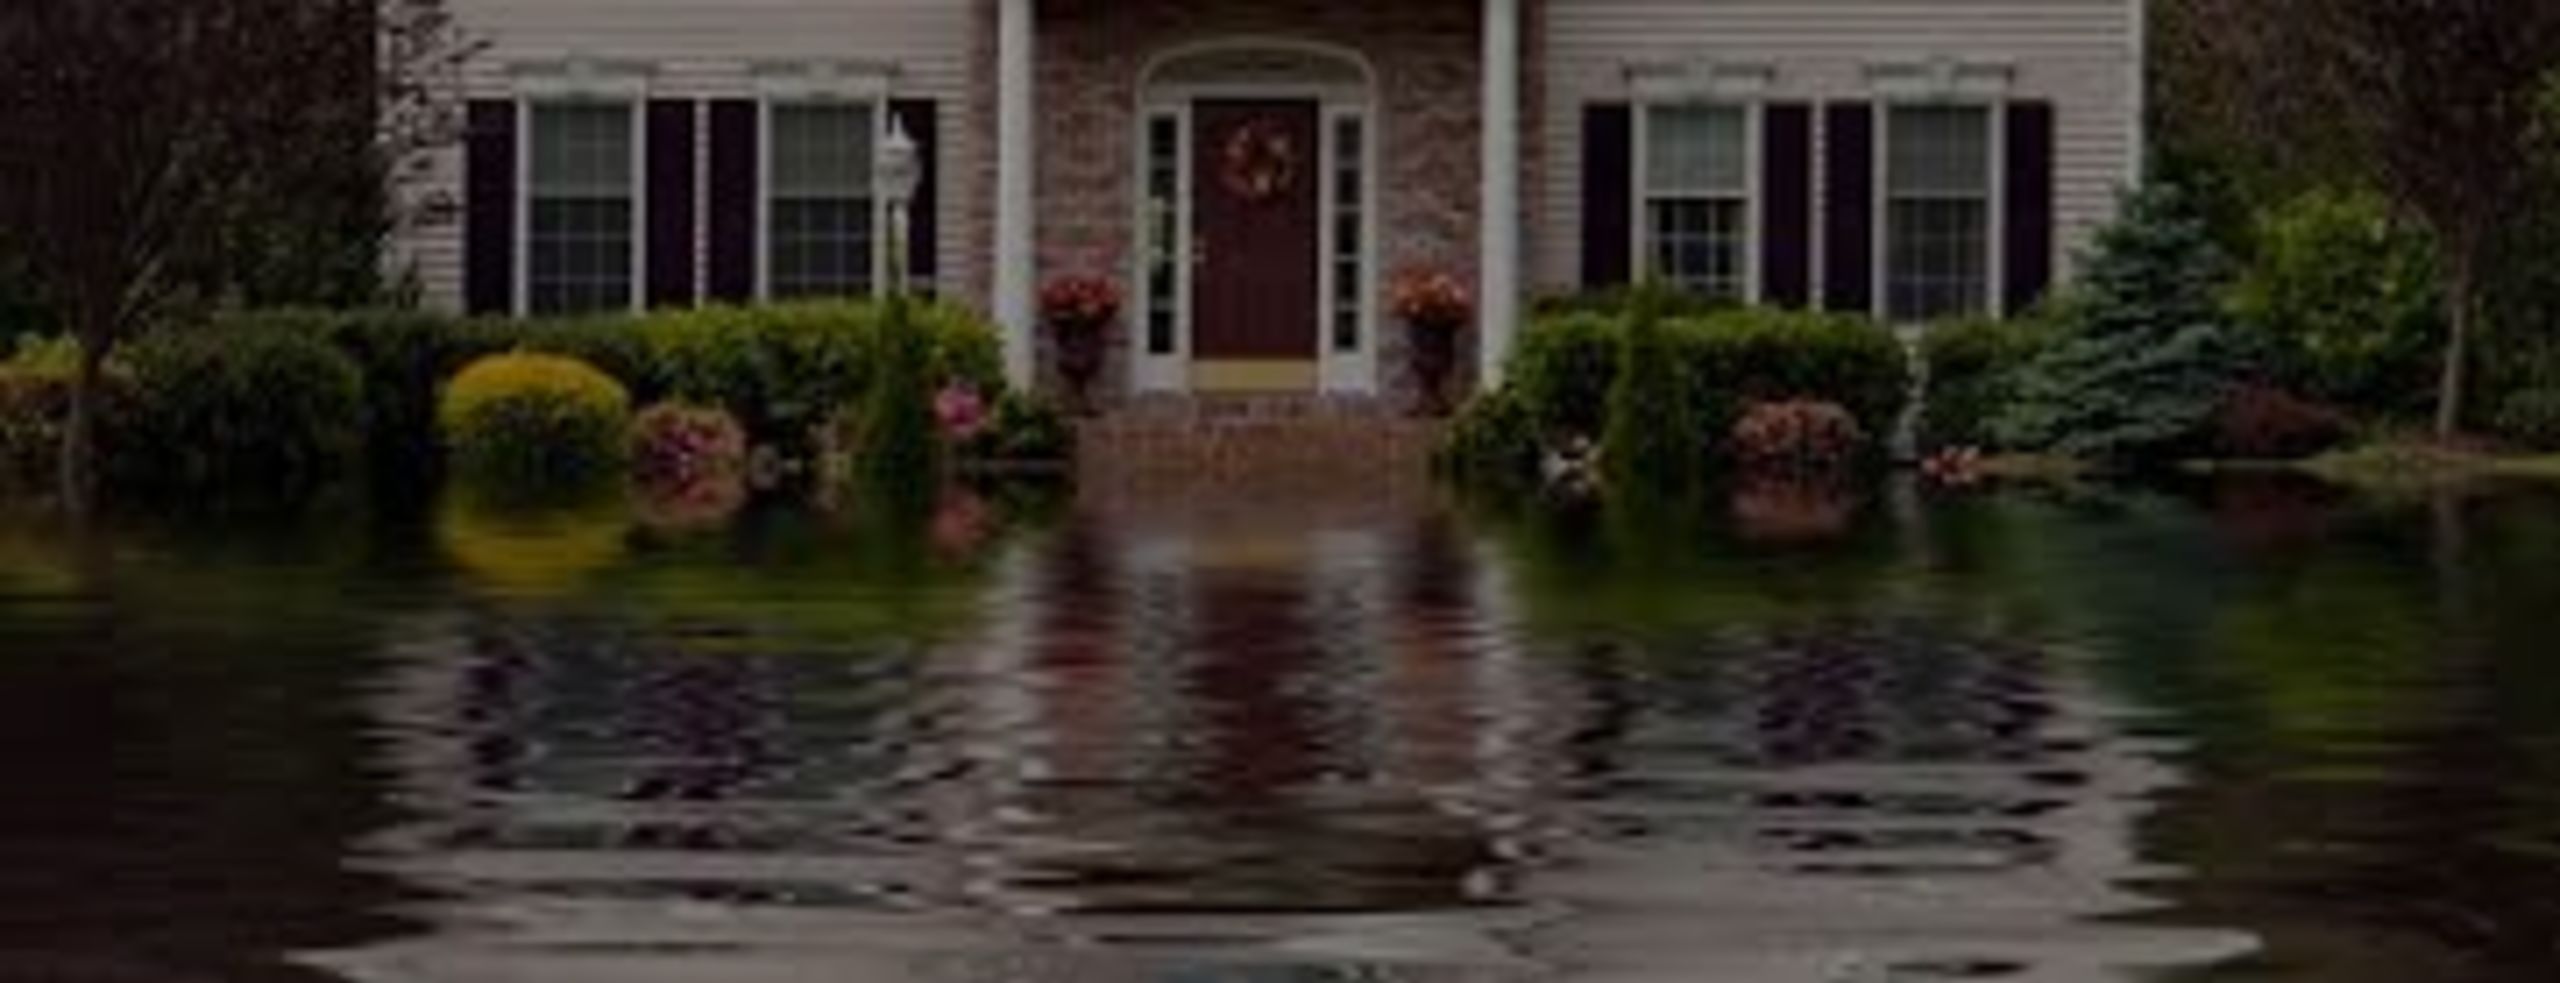 Preventing Water Damage in YOUR Home